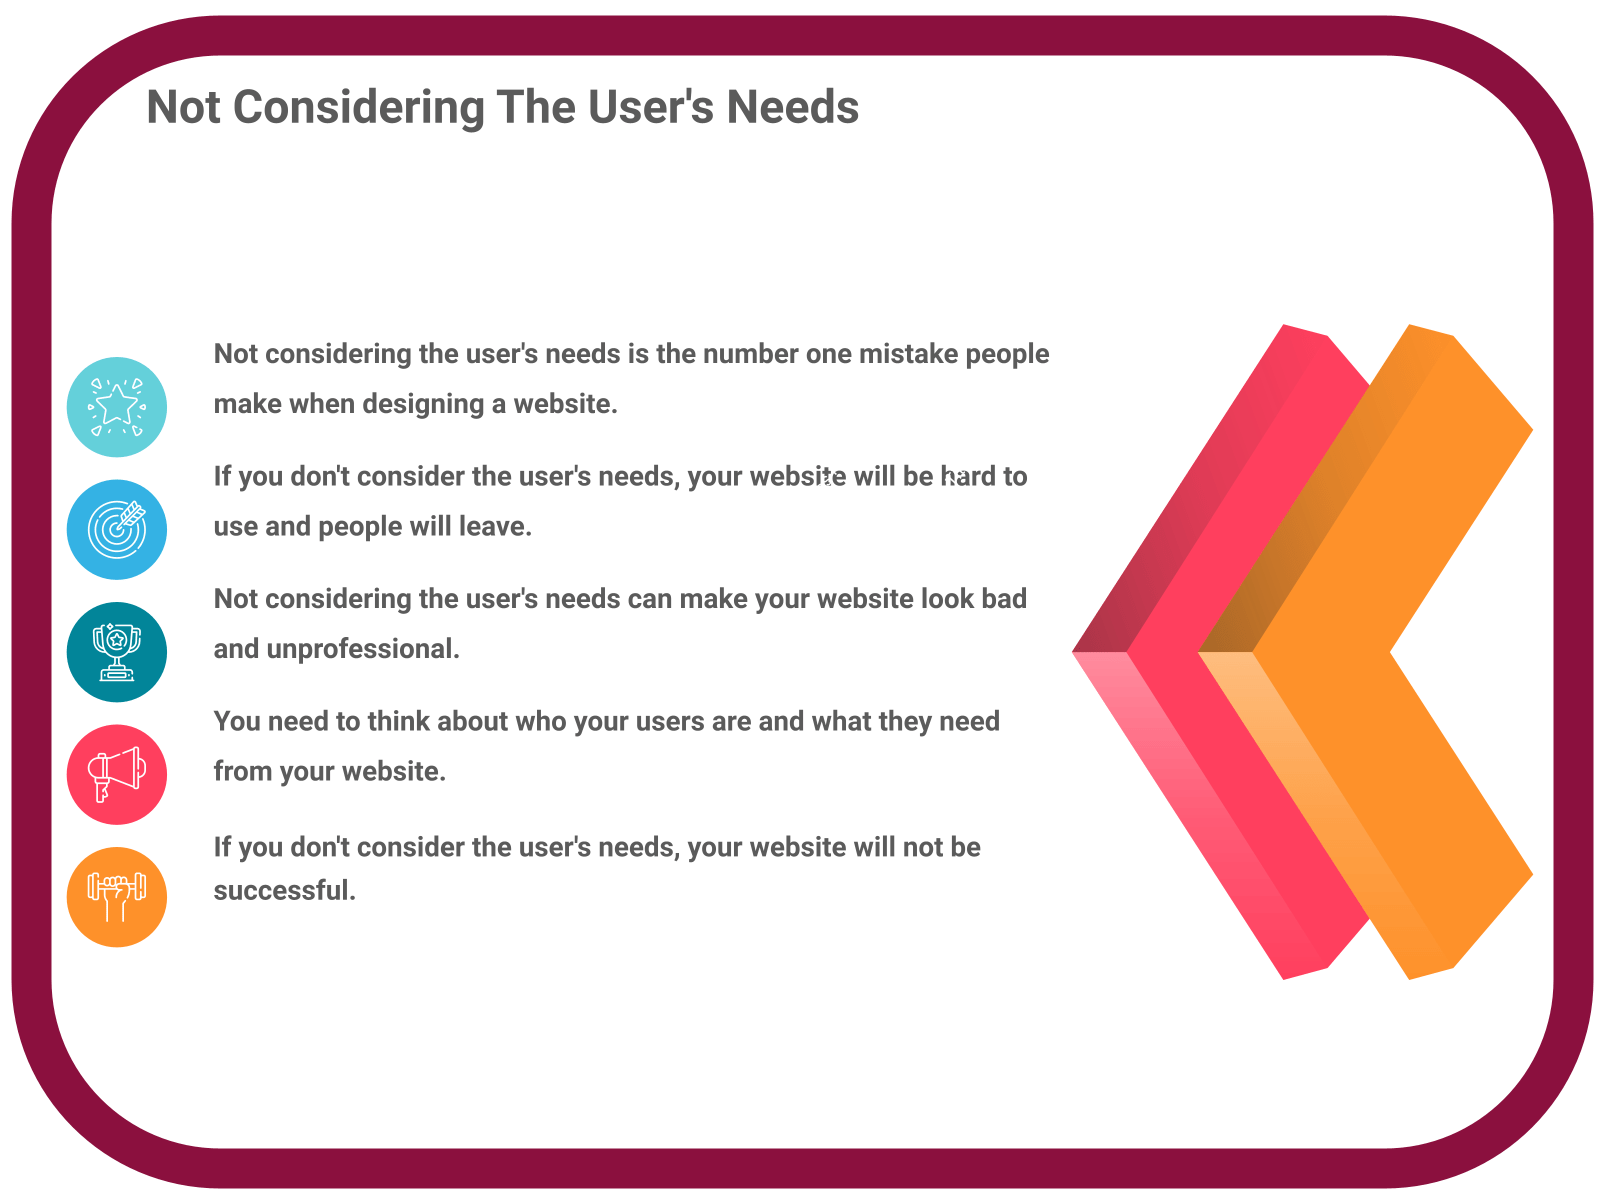 INFOGRAPHIC: Not considering the user’s needs - Poll the People